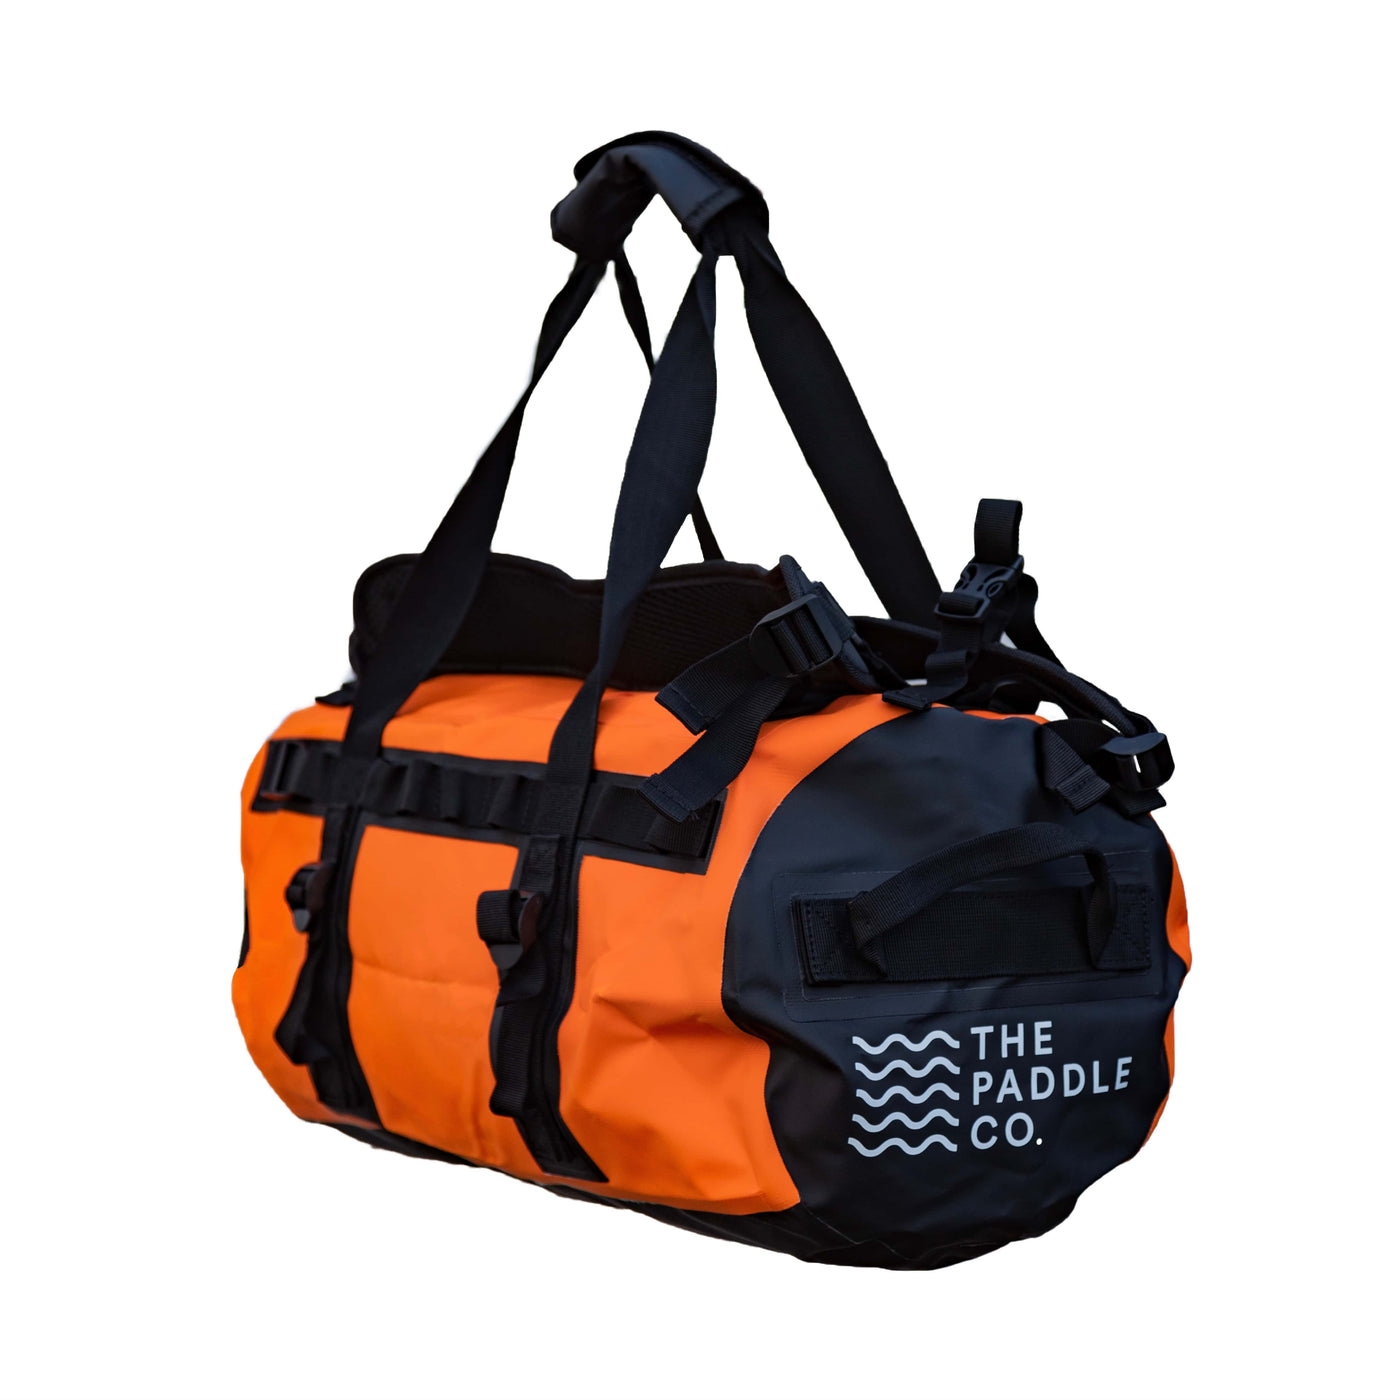 Airlines web language Paddle Co. Waterproof Duffle Bag - The Paddle Co.